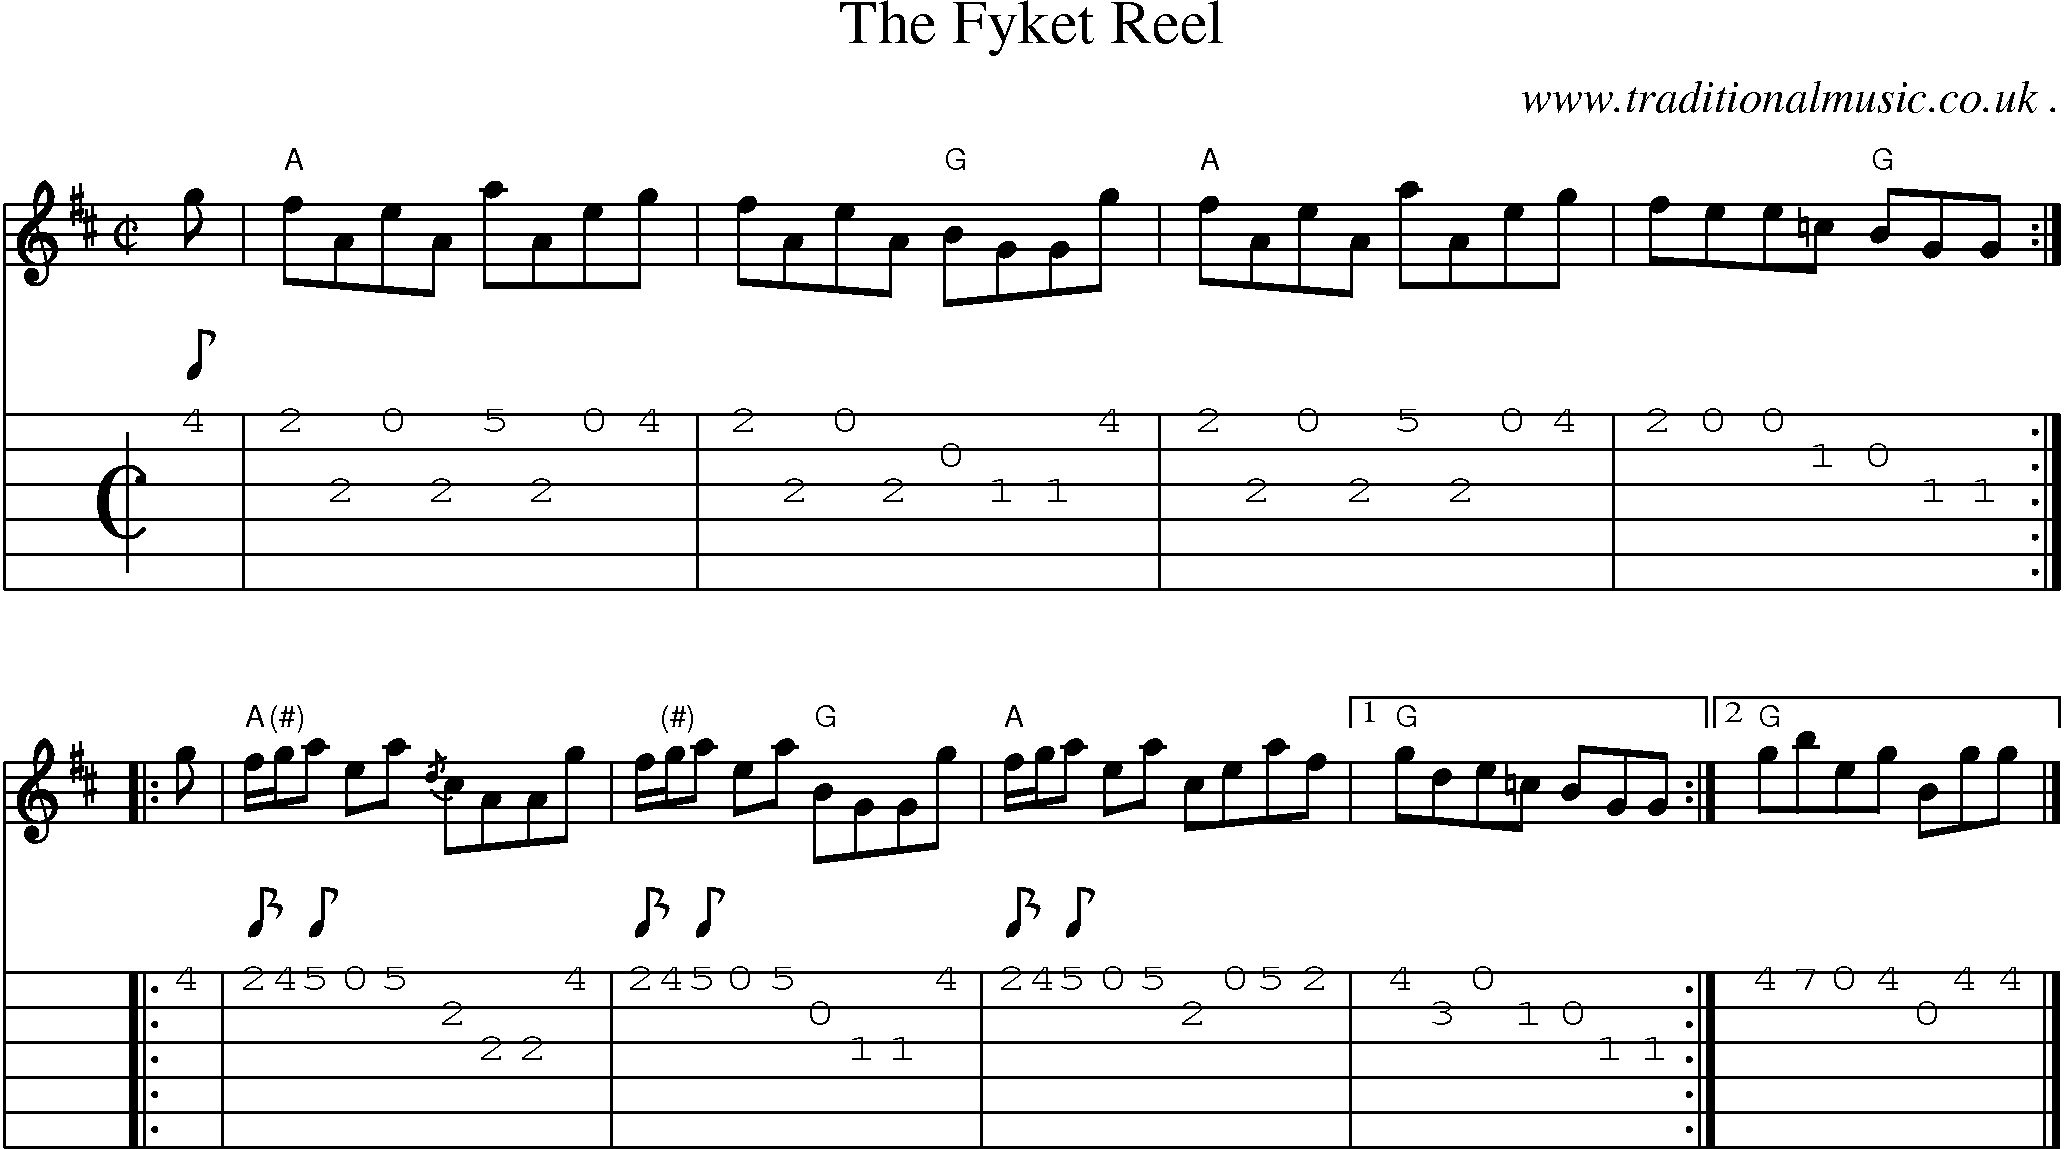 Sheet-music  score, Chords and Guitar Tabs for The Fyket Reel